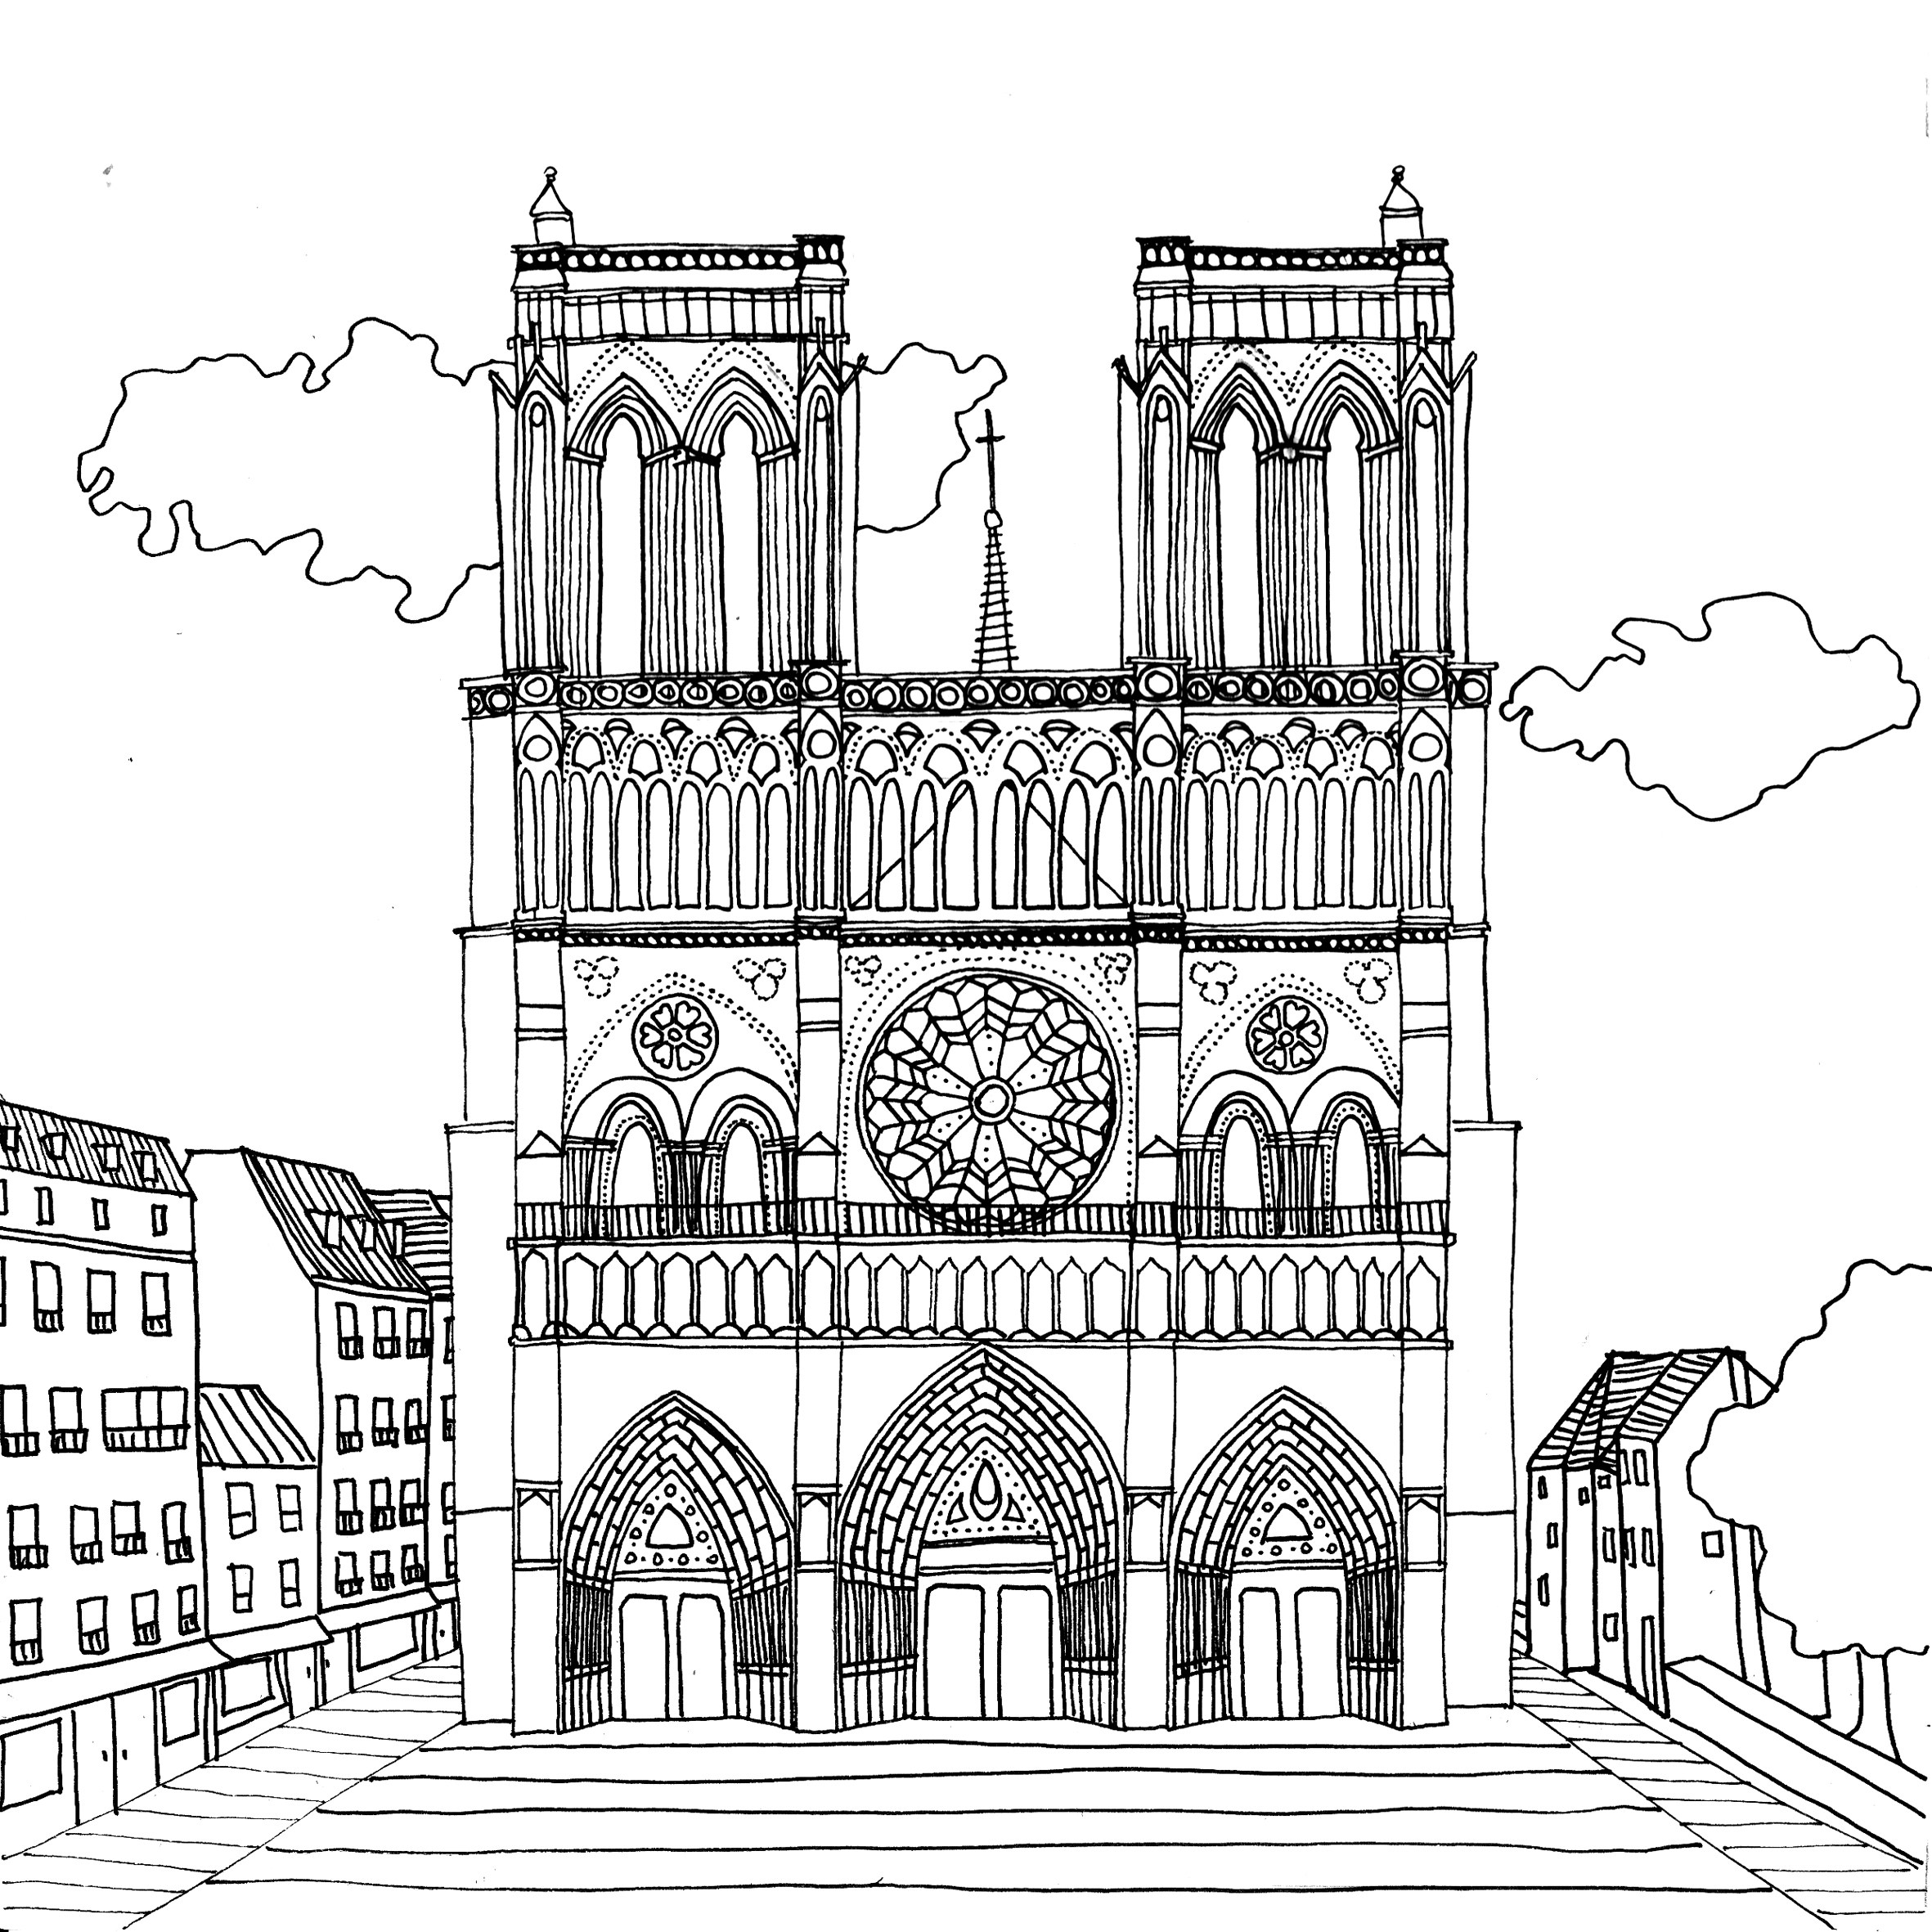 notre-dame-cathedral-paris-coloring-play-free-coloring-game-online